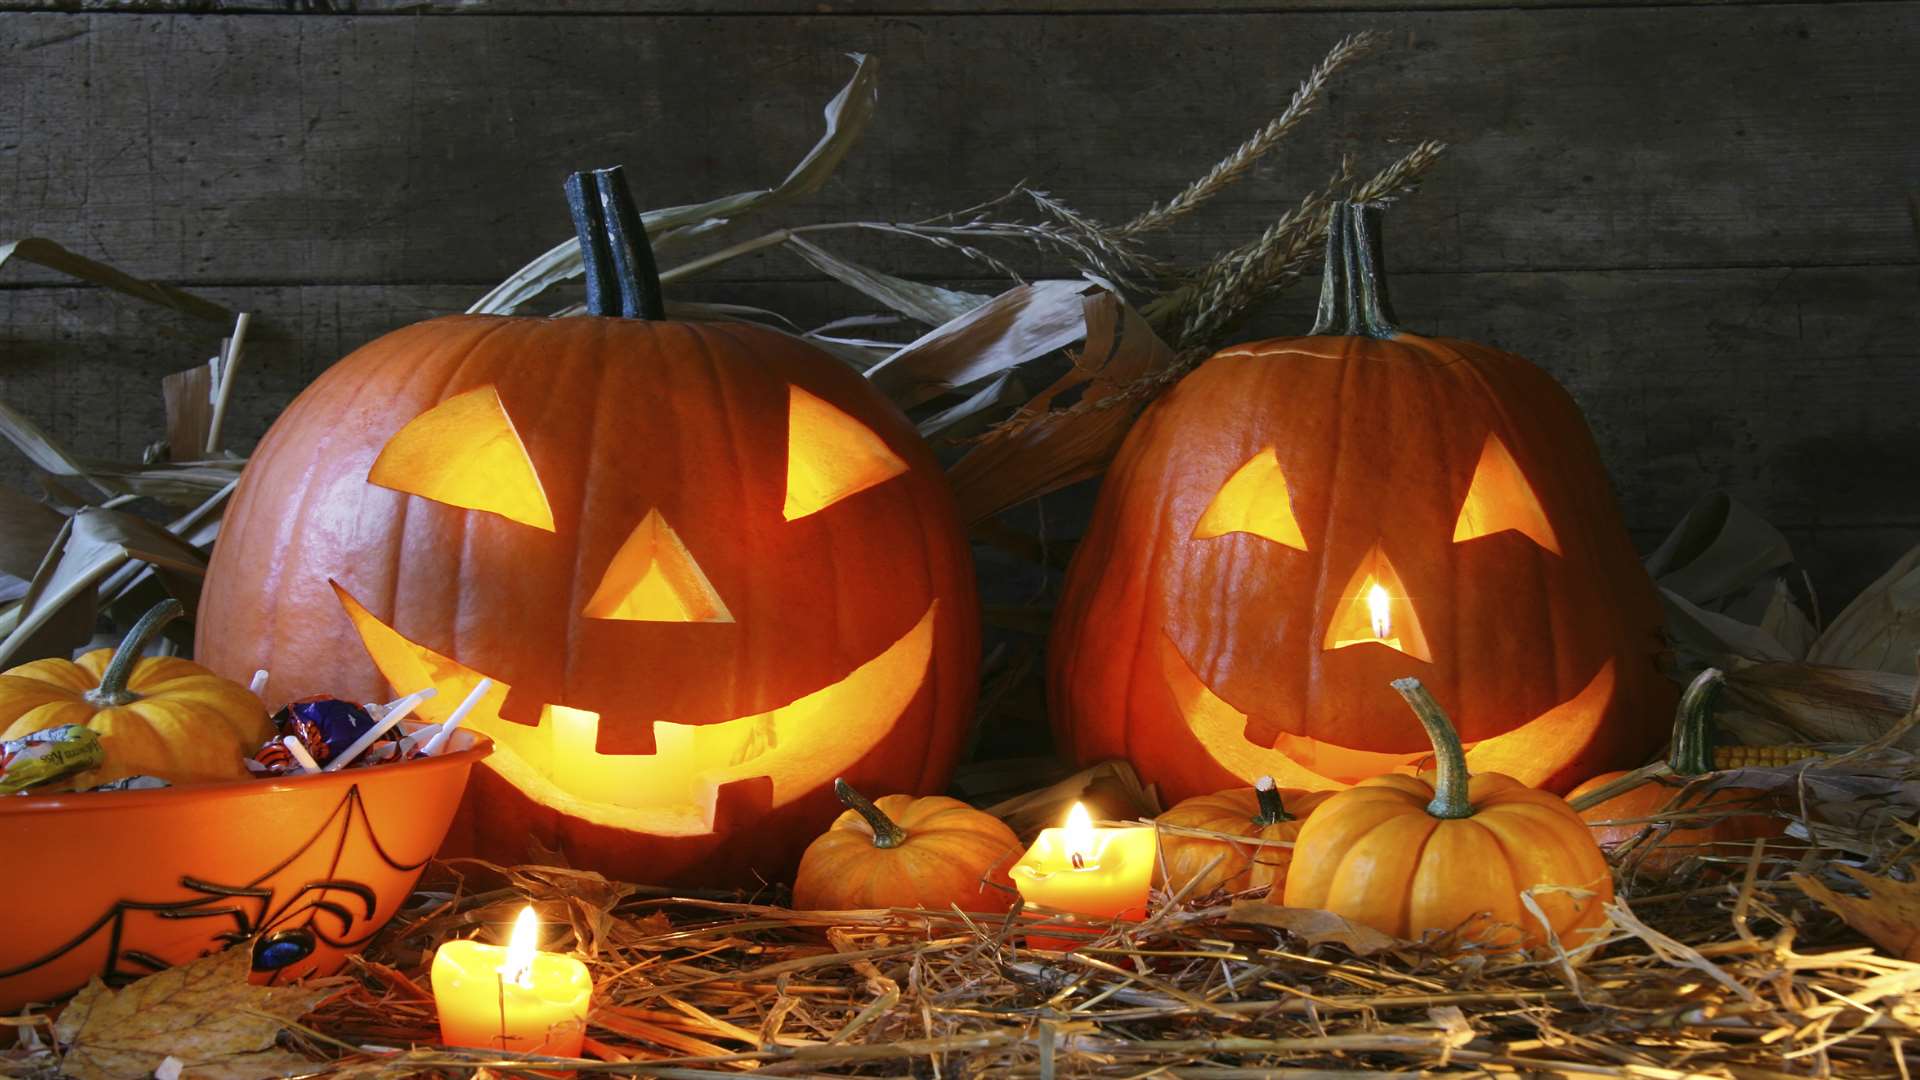 Pumpkin carving will take place during Halloween events